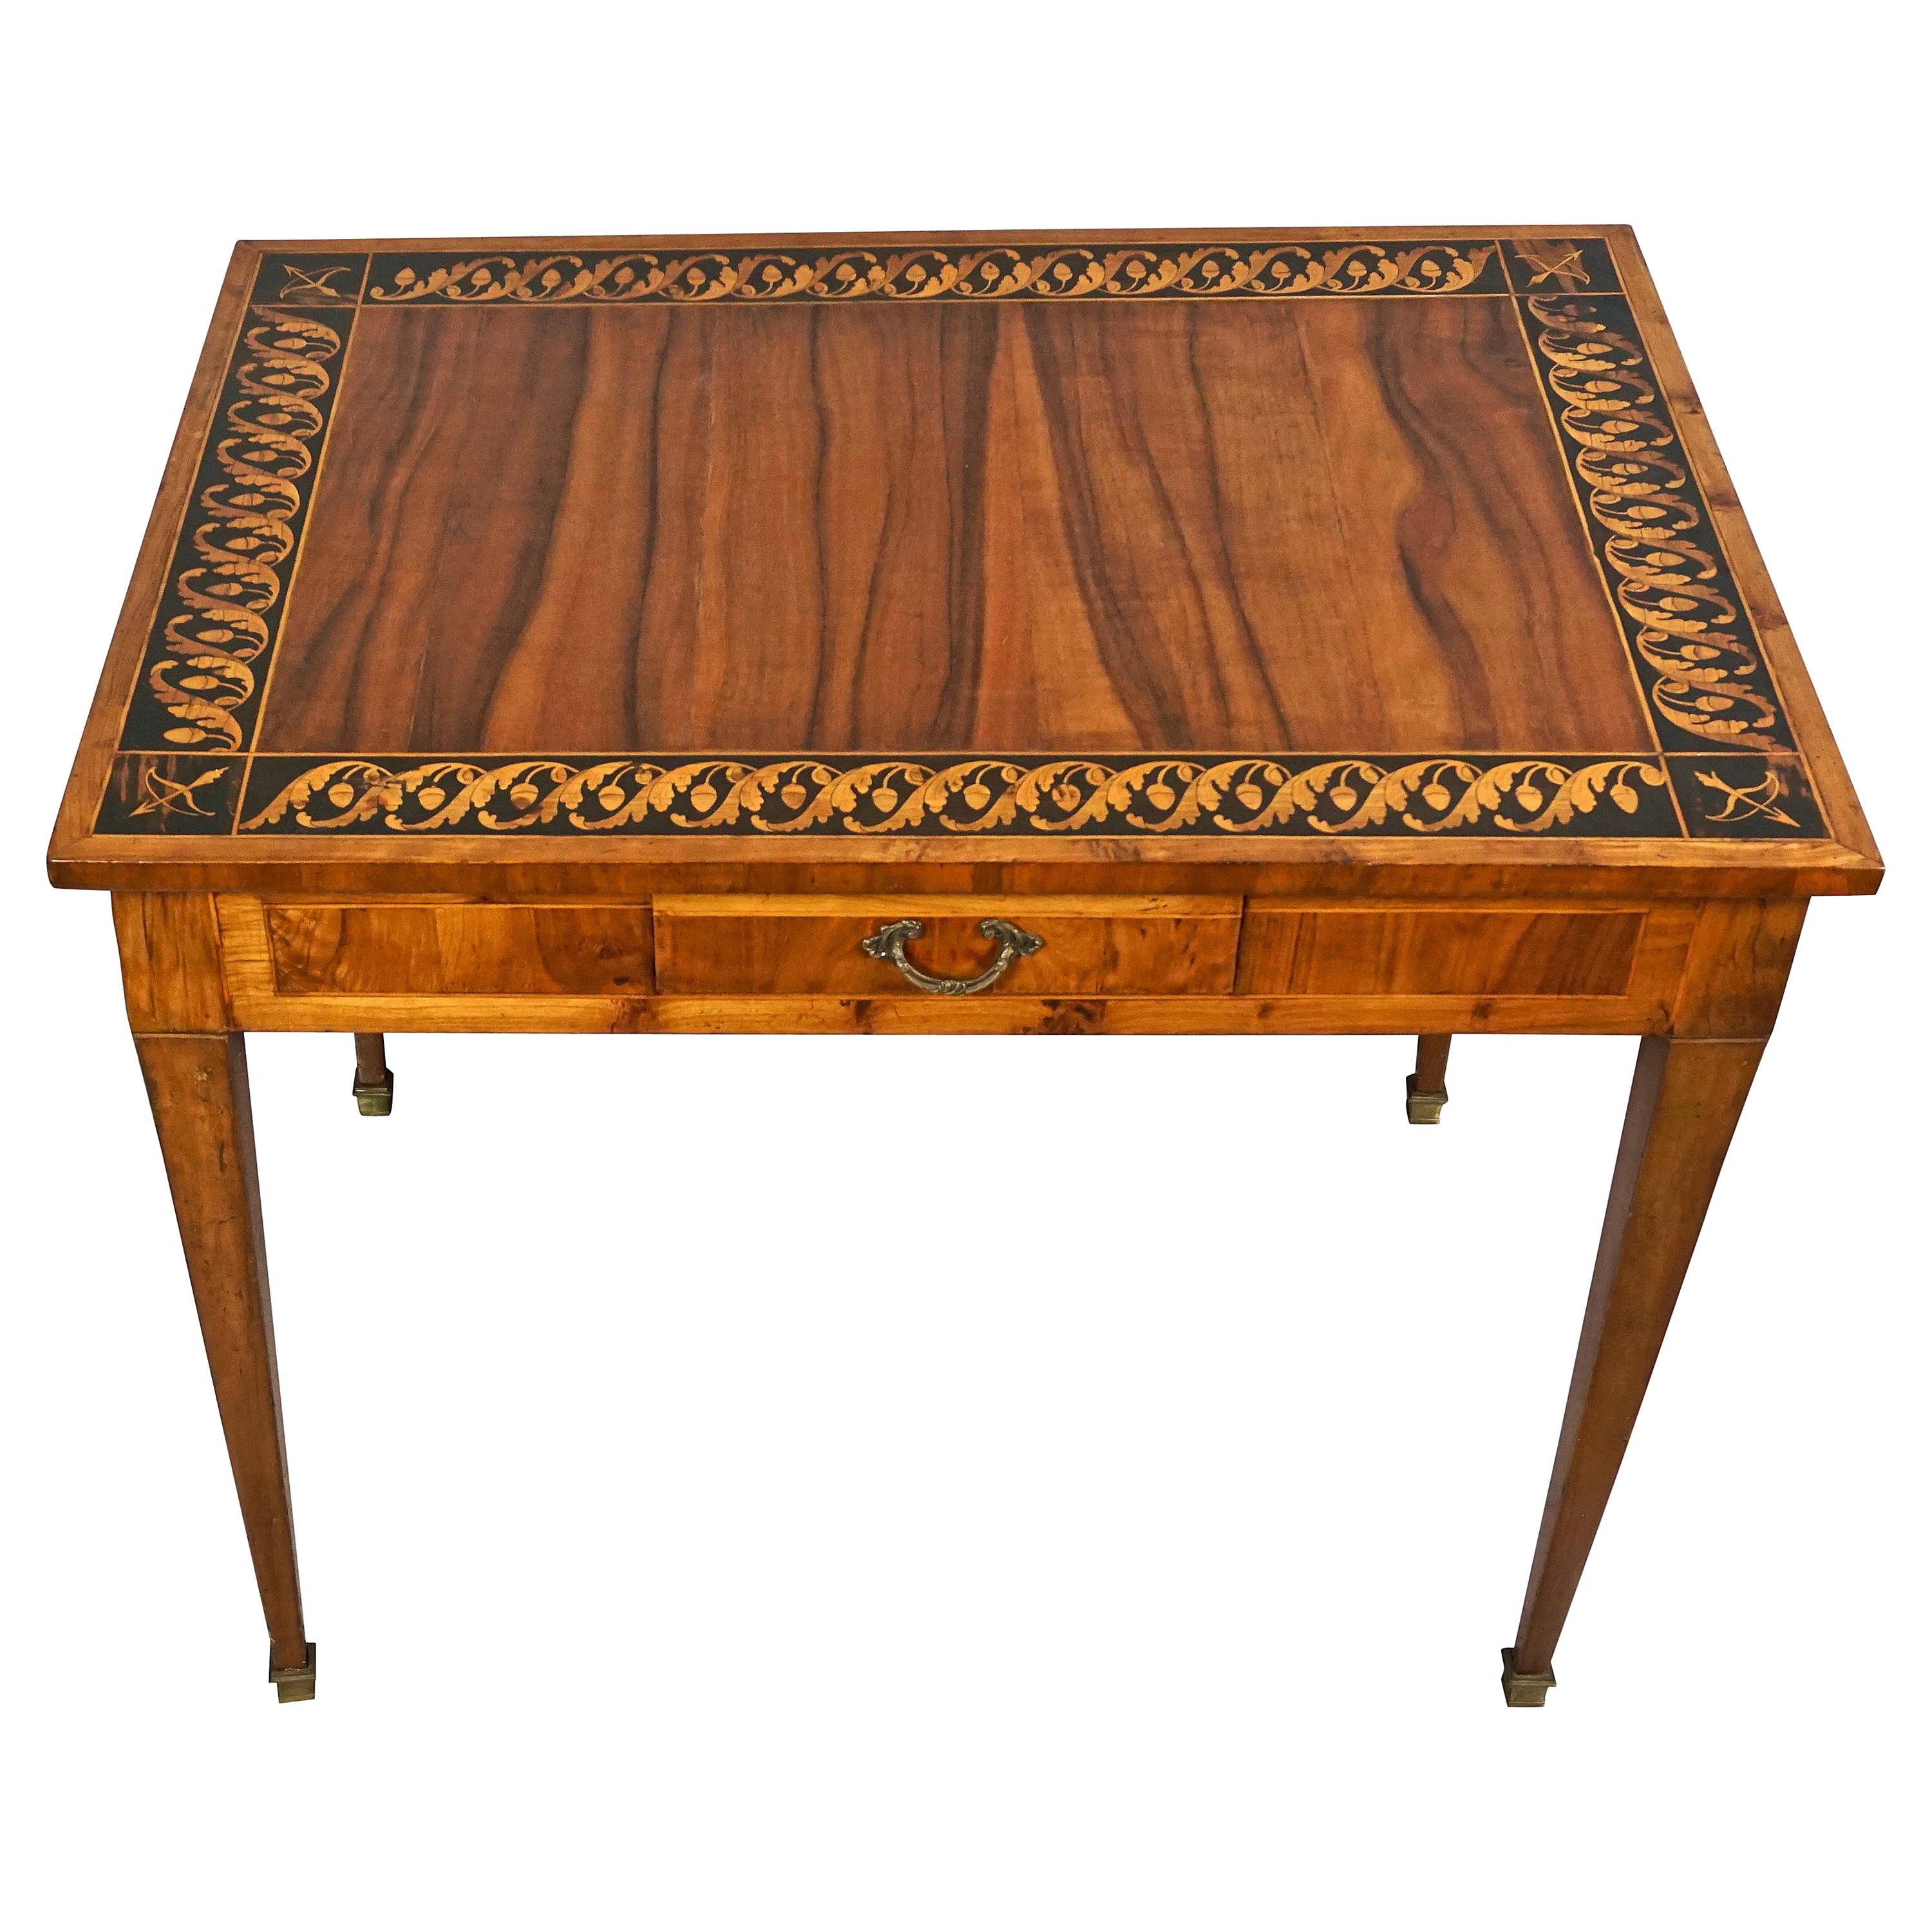 Italian Neoclassical Inlaid Walnut Table with Drawer